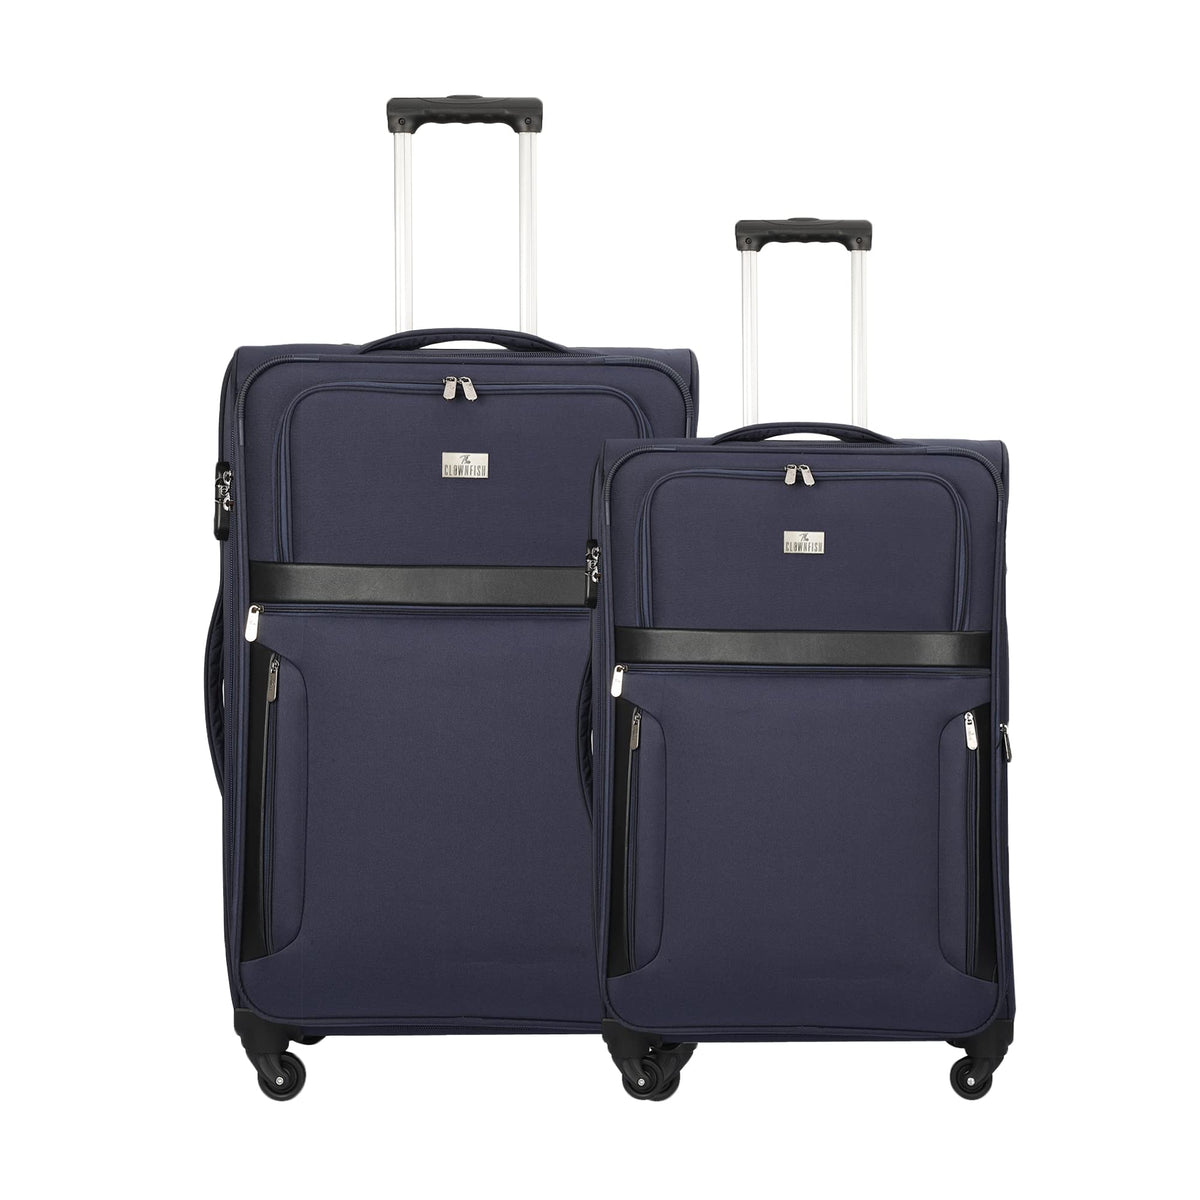 The Clownfish Combo of 2 Faramund Series Luggage Polyester Softsided Suitcases Four Wheel Trolley Bags - Navy Blue (68 cm, 56 cm)